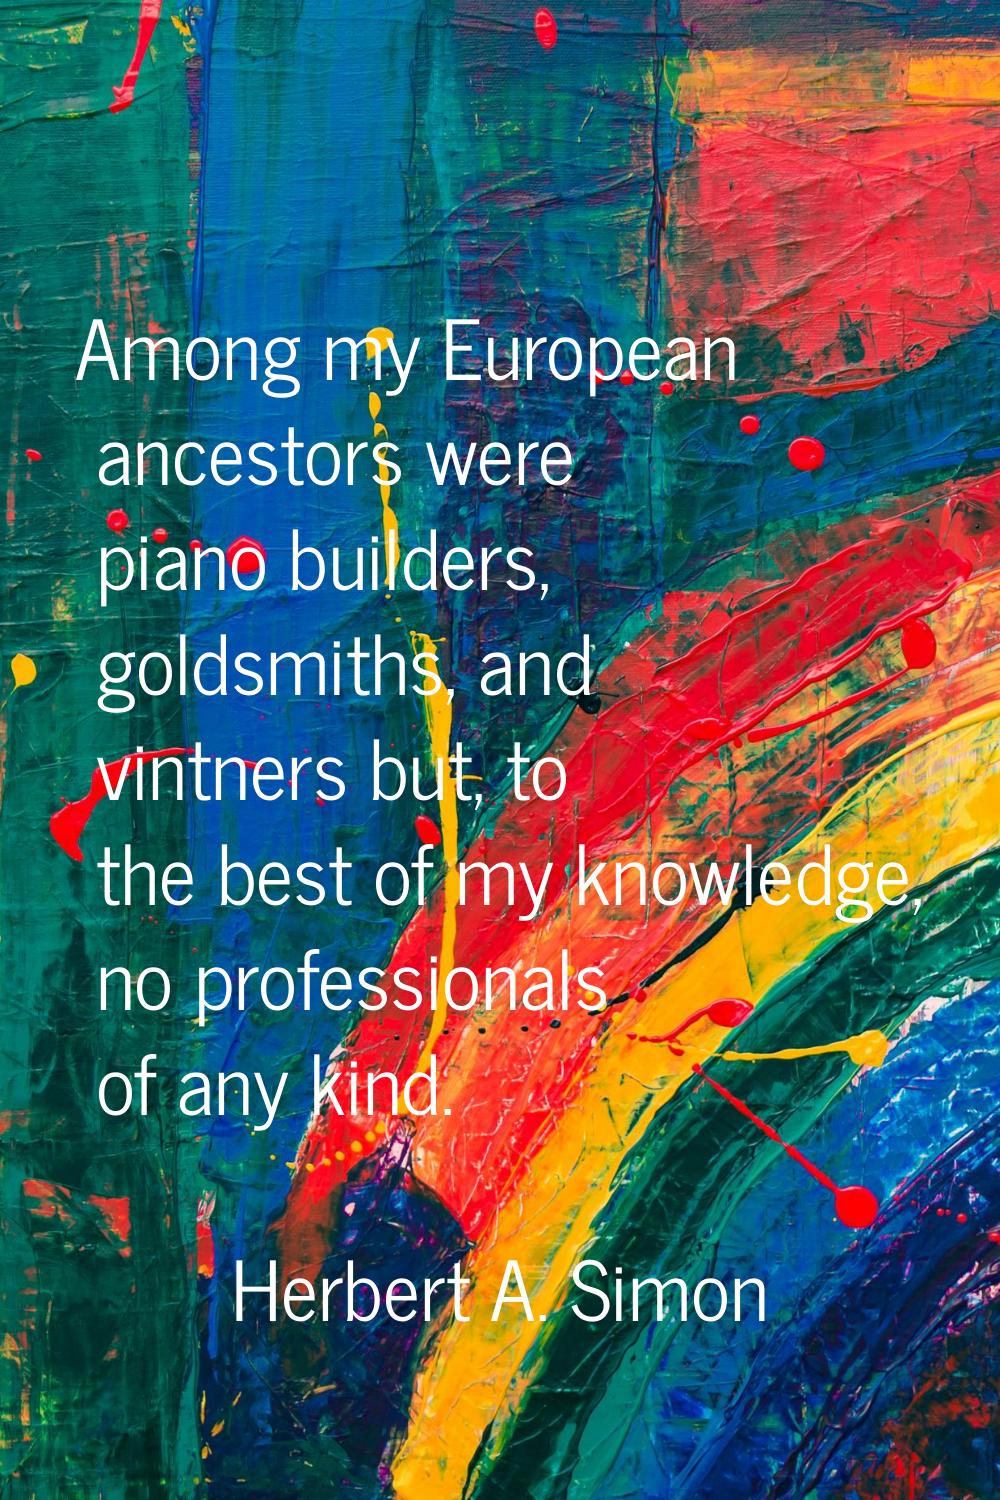 Among my European ancestors were piano builders, goldsmiths, and vintners but, to the best of my kn